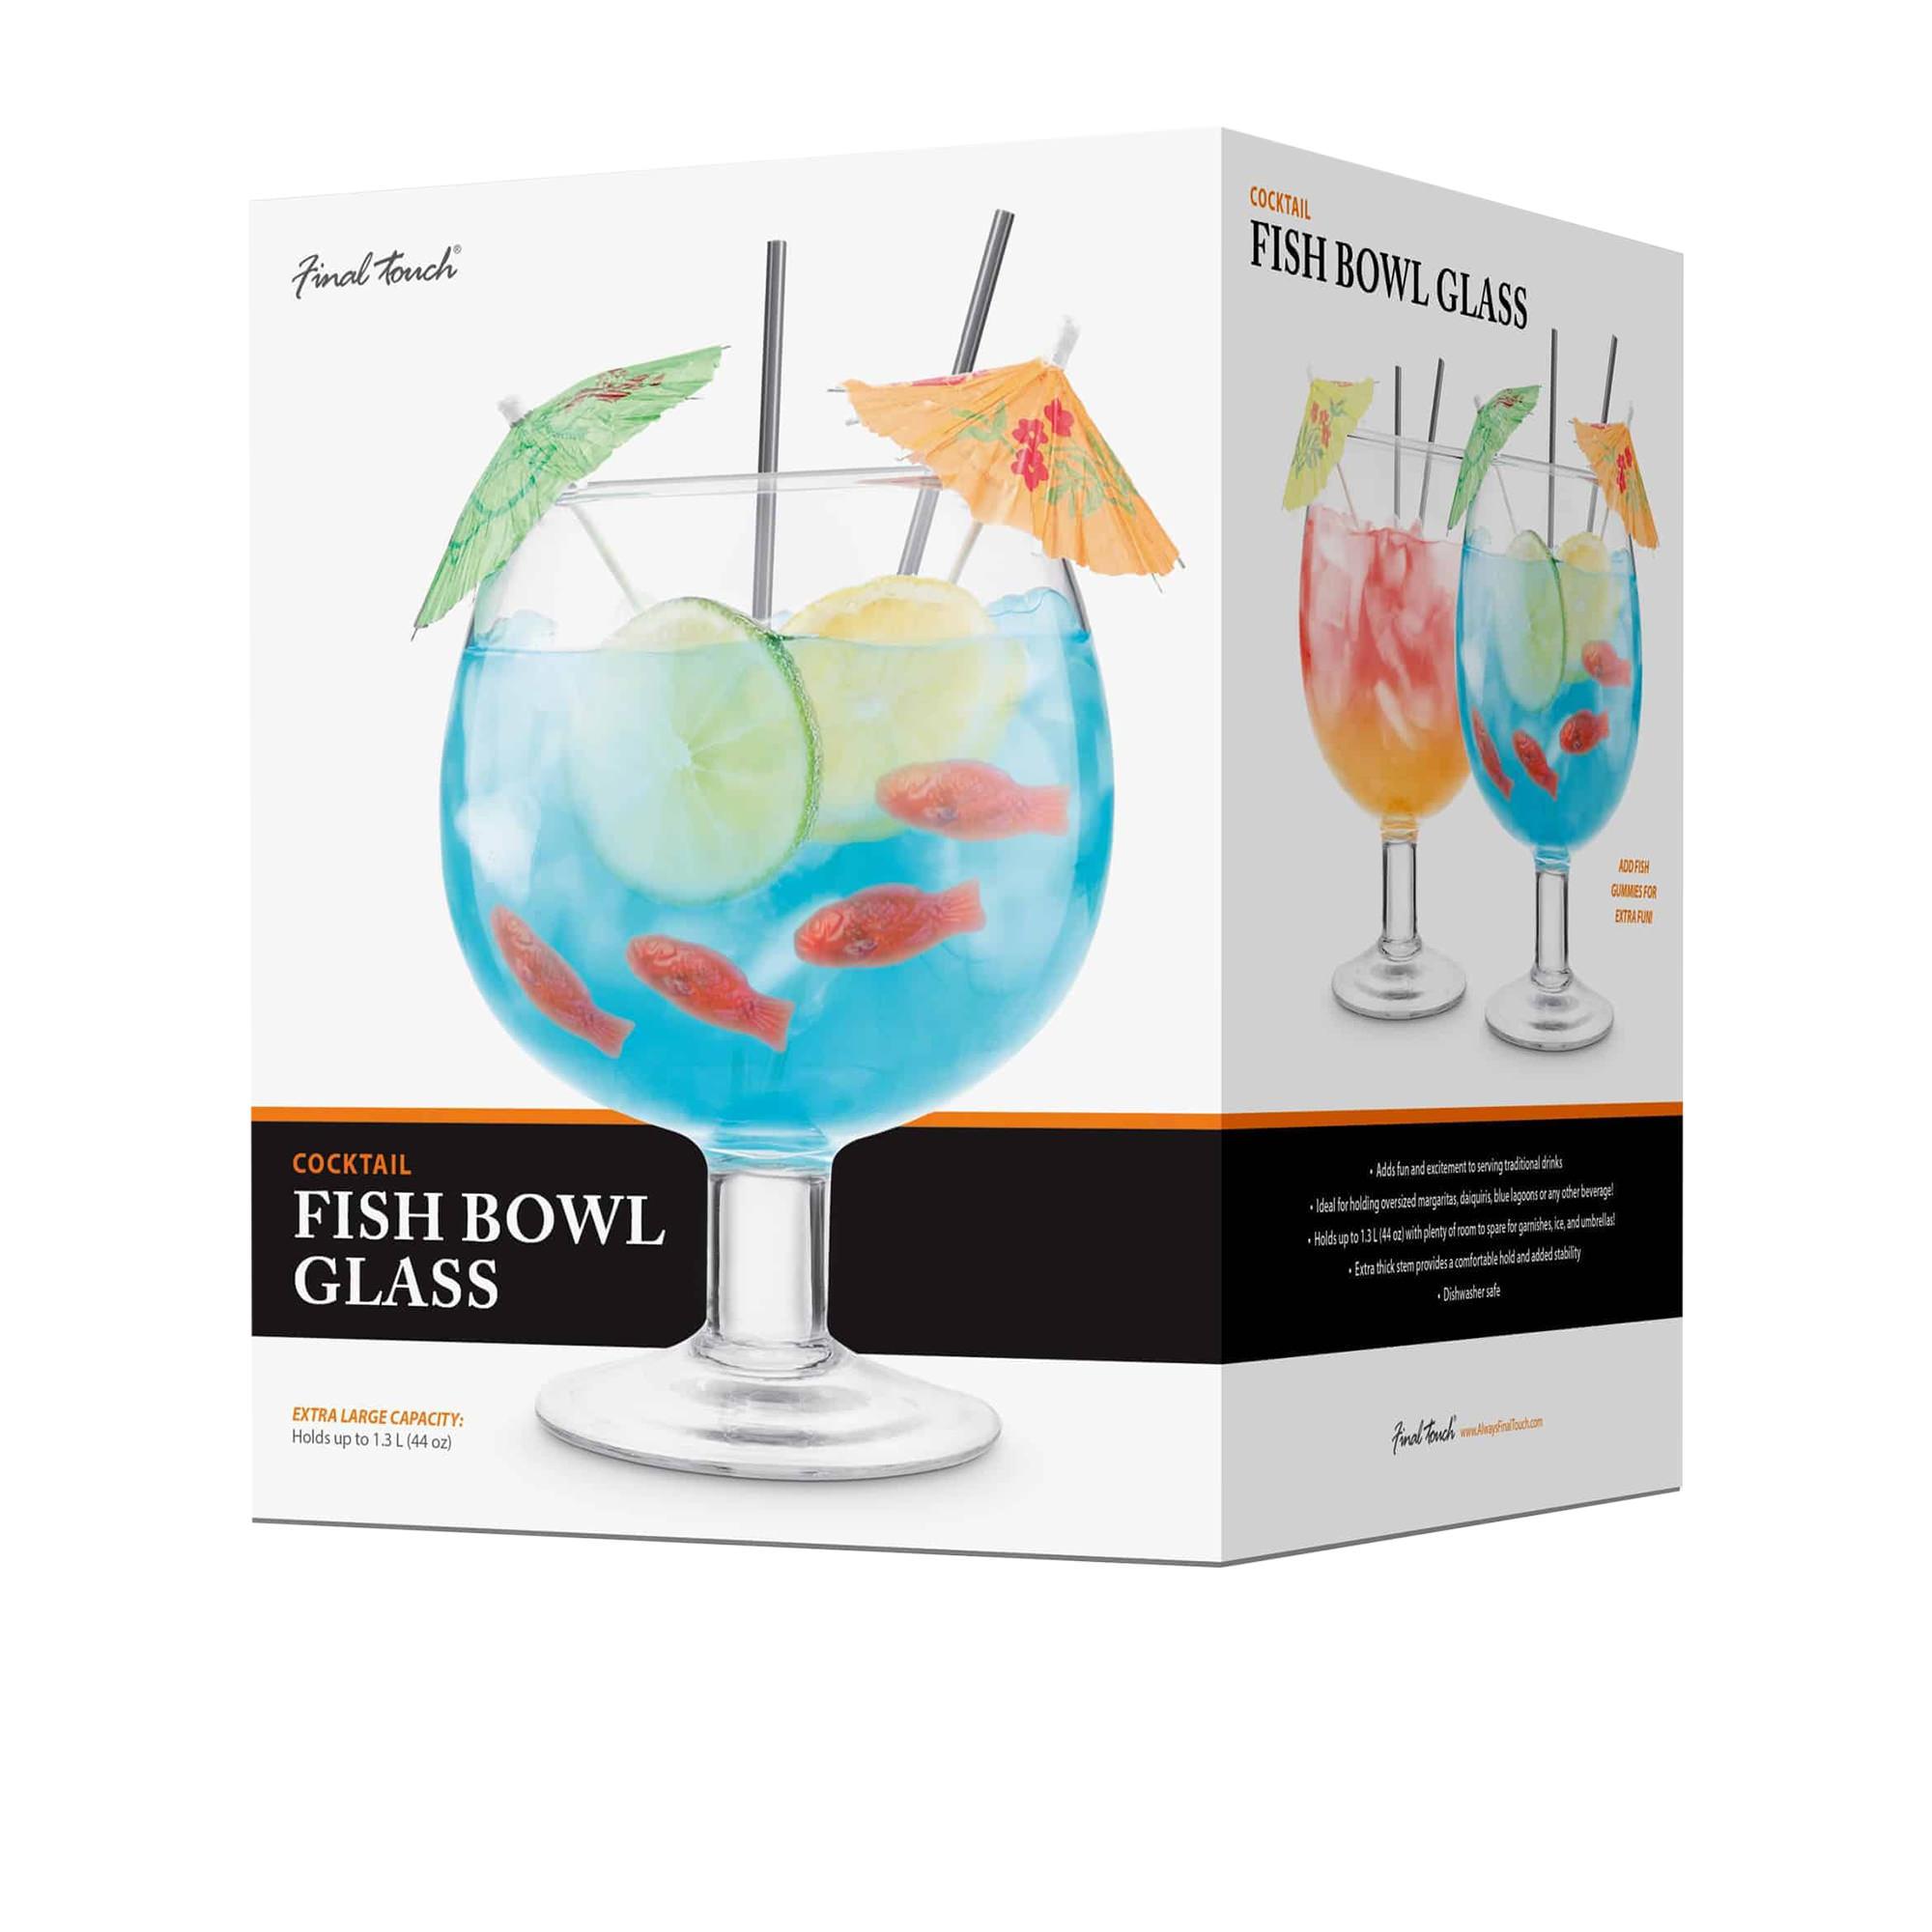 Final Touch Fish Bowl Glass 1.3L Image 4